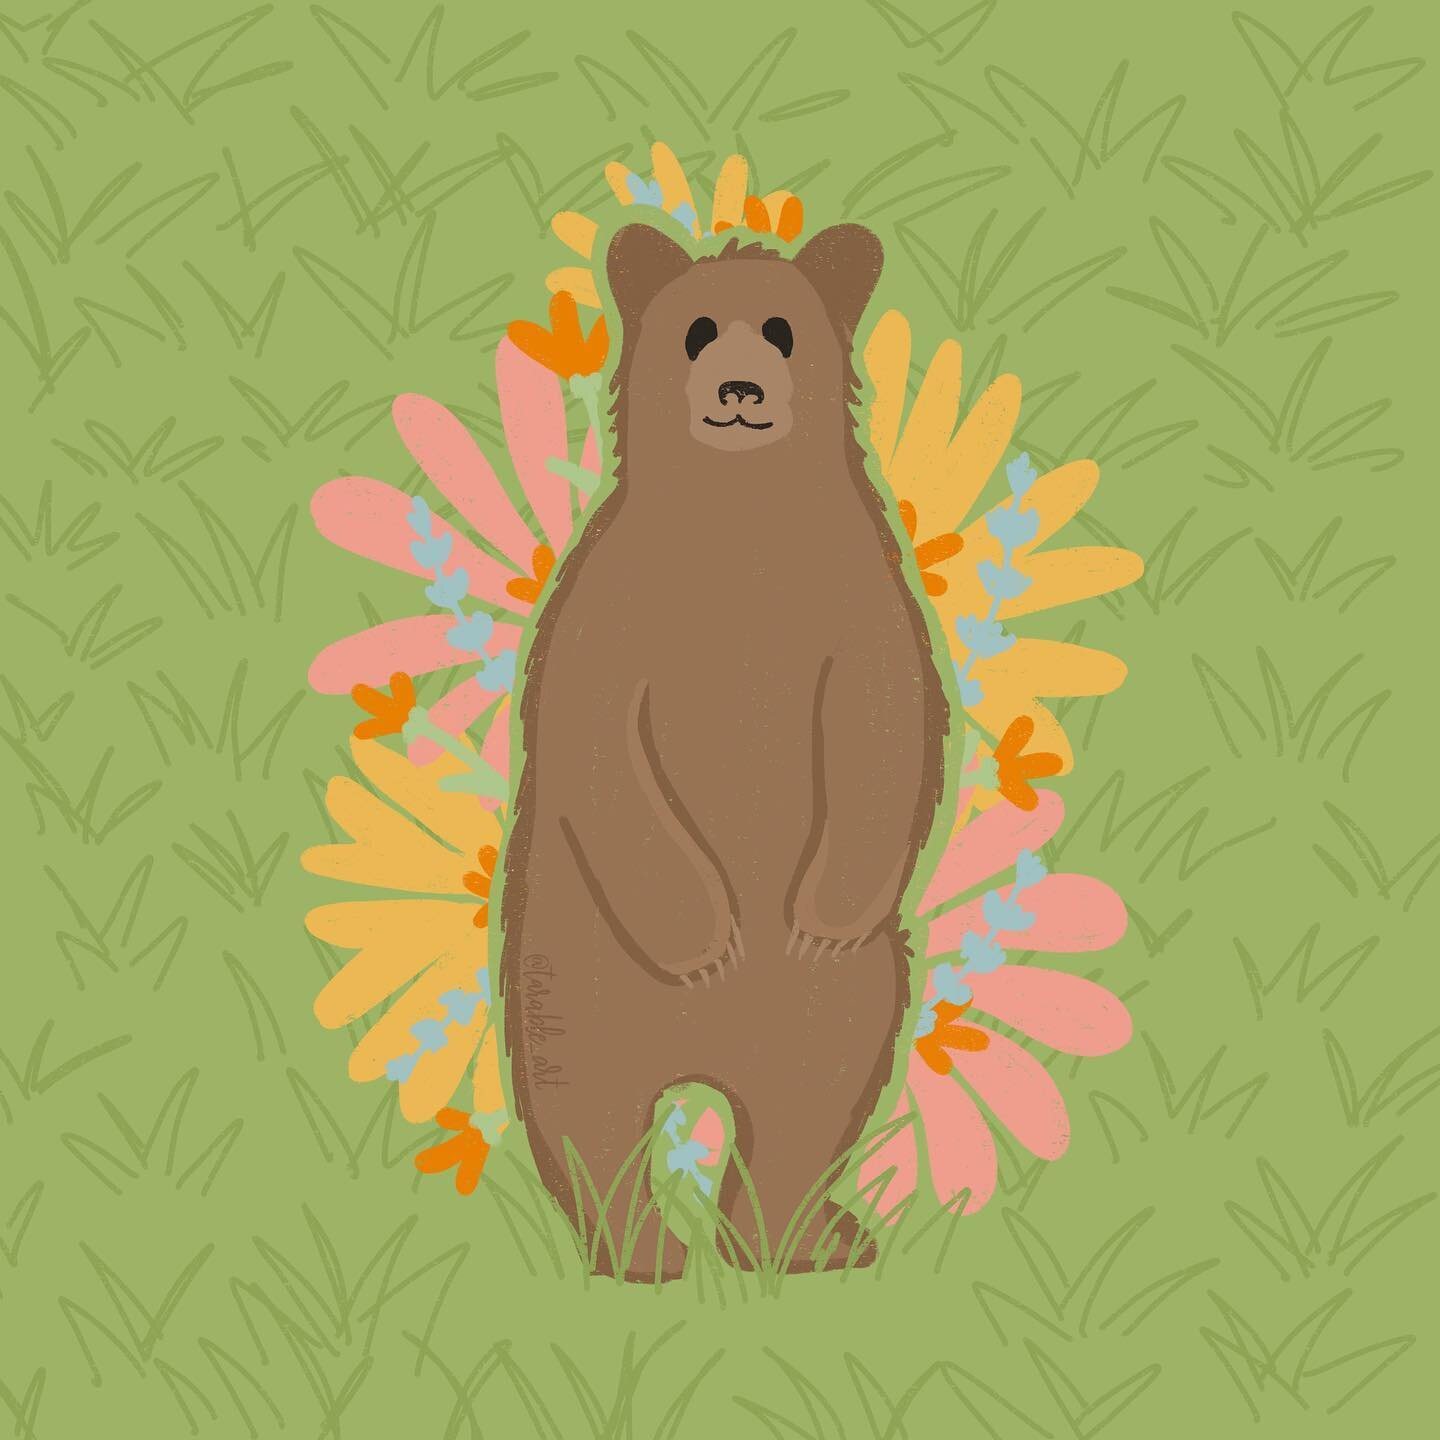 Today&rsquo;s animal doodle is a bear! This artwork took me waayyy too long to finish. I originally drew two cubs in different positions but the second one just didn&rsquo;t look right. So I&rsquo;m thinking once I&rsquo;m through with this little ch